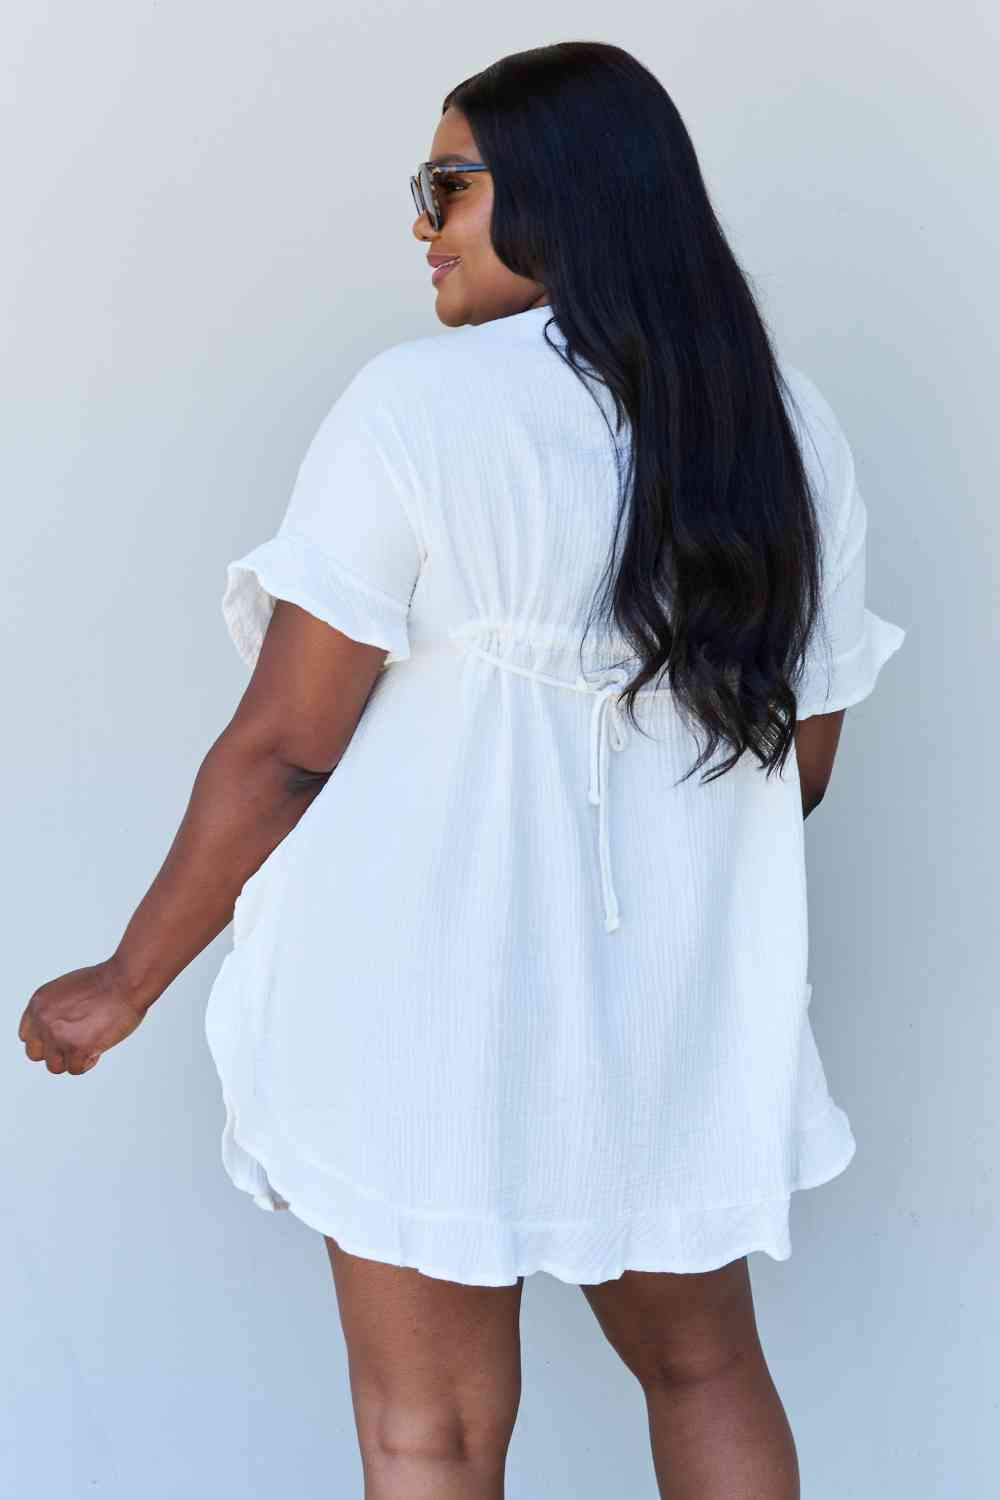 Ninexis Out Of Time Full Size Ruffle Hem Dress with Drawstring Waistband in White No 8